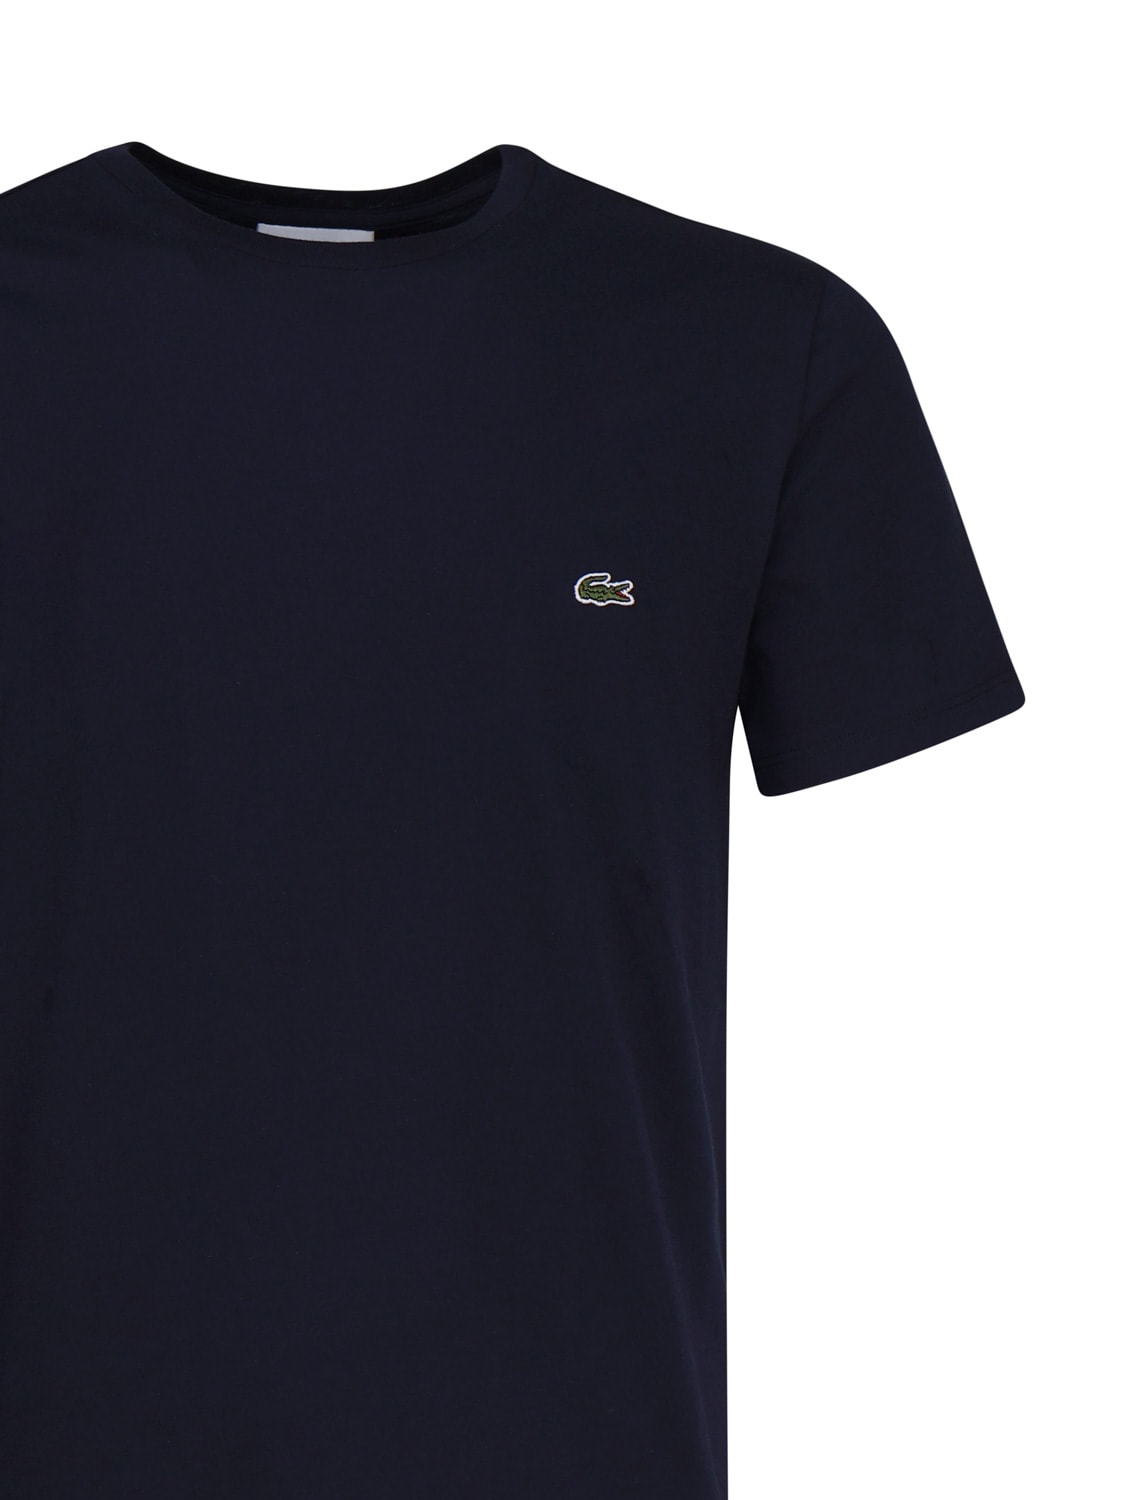 Shop Lacoste Navy Blue T-shirt In Cotton Jersey